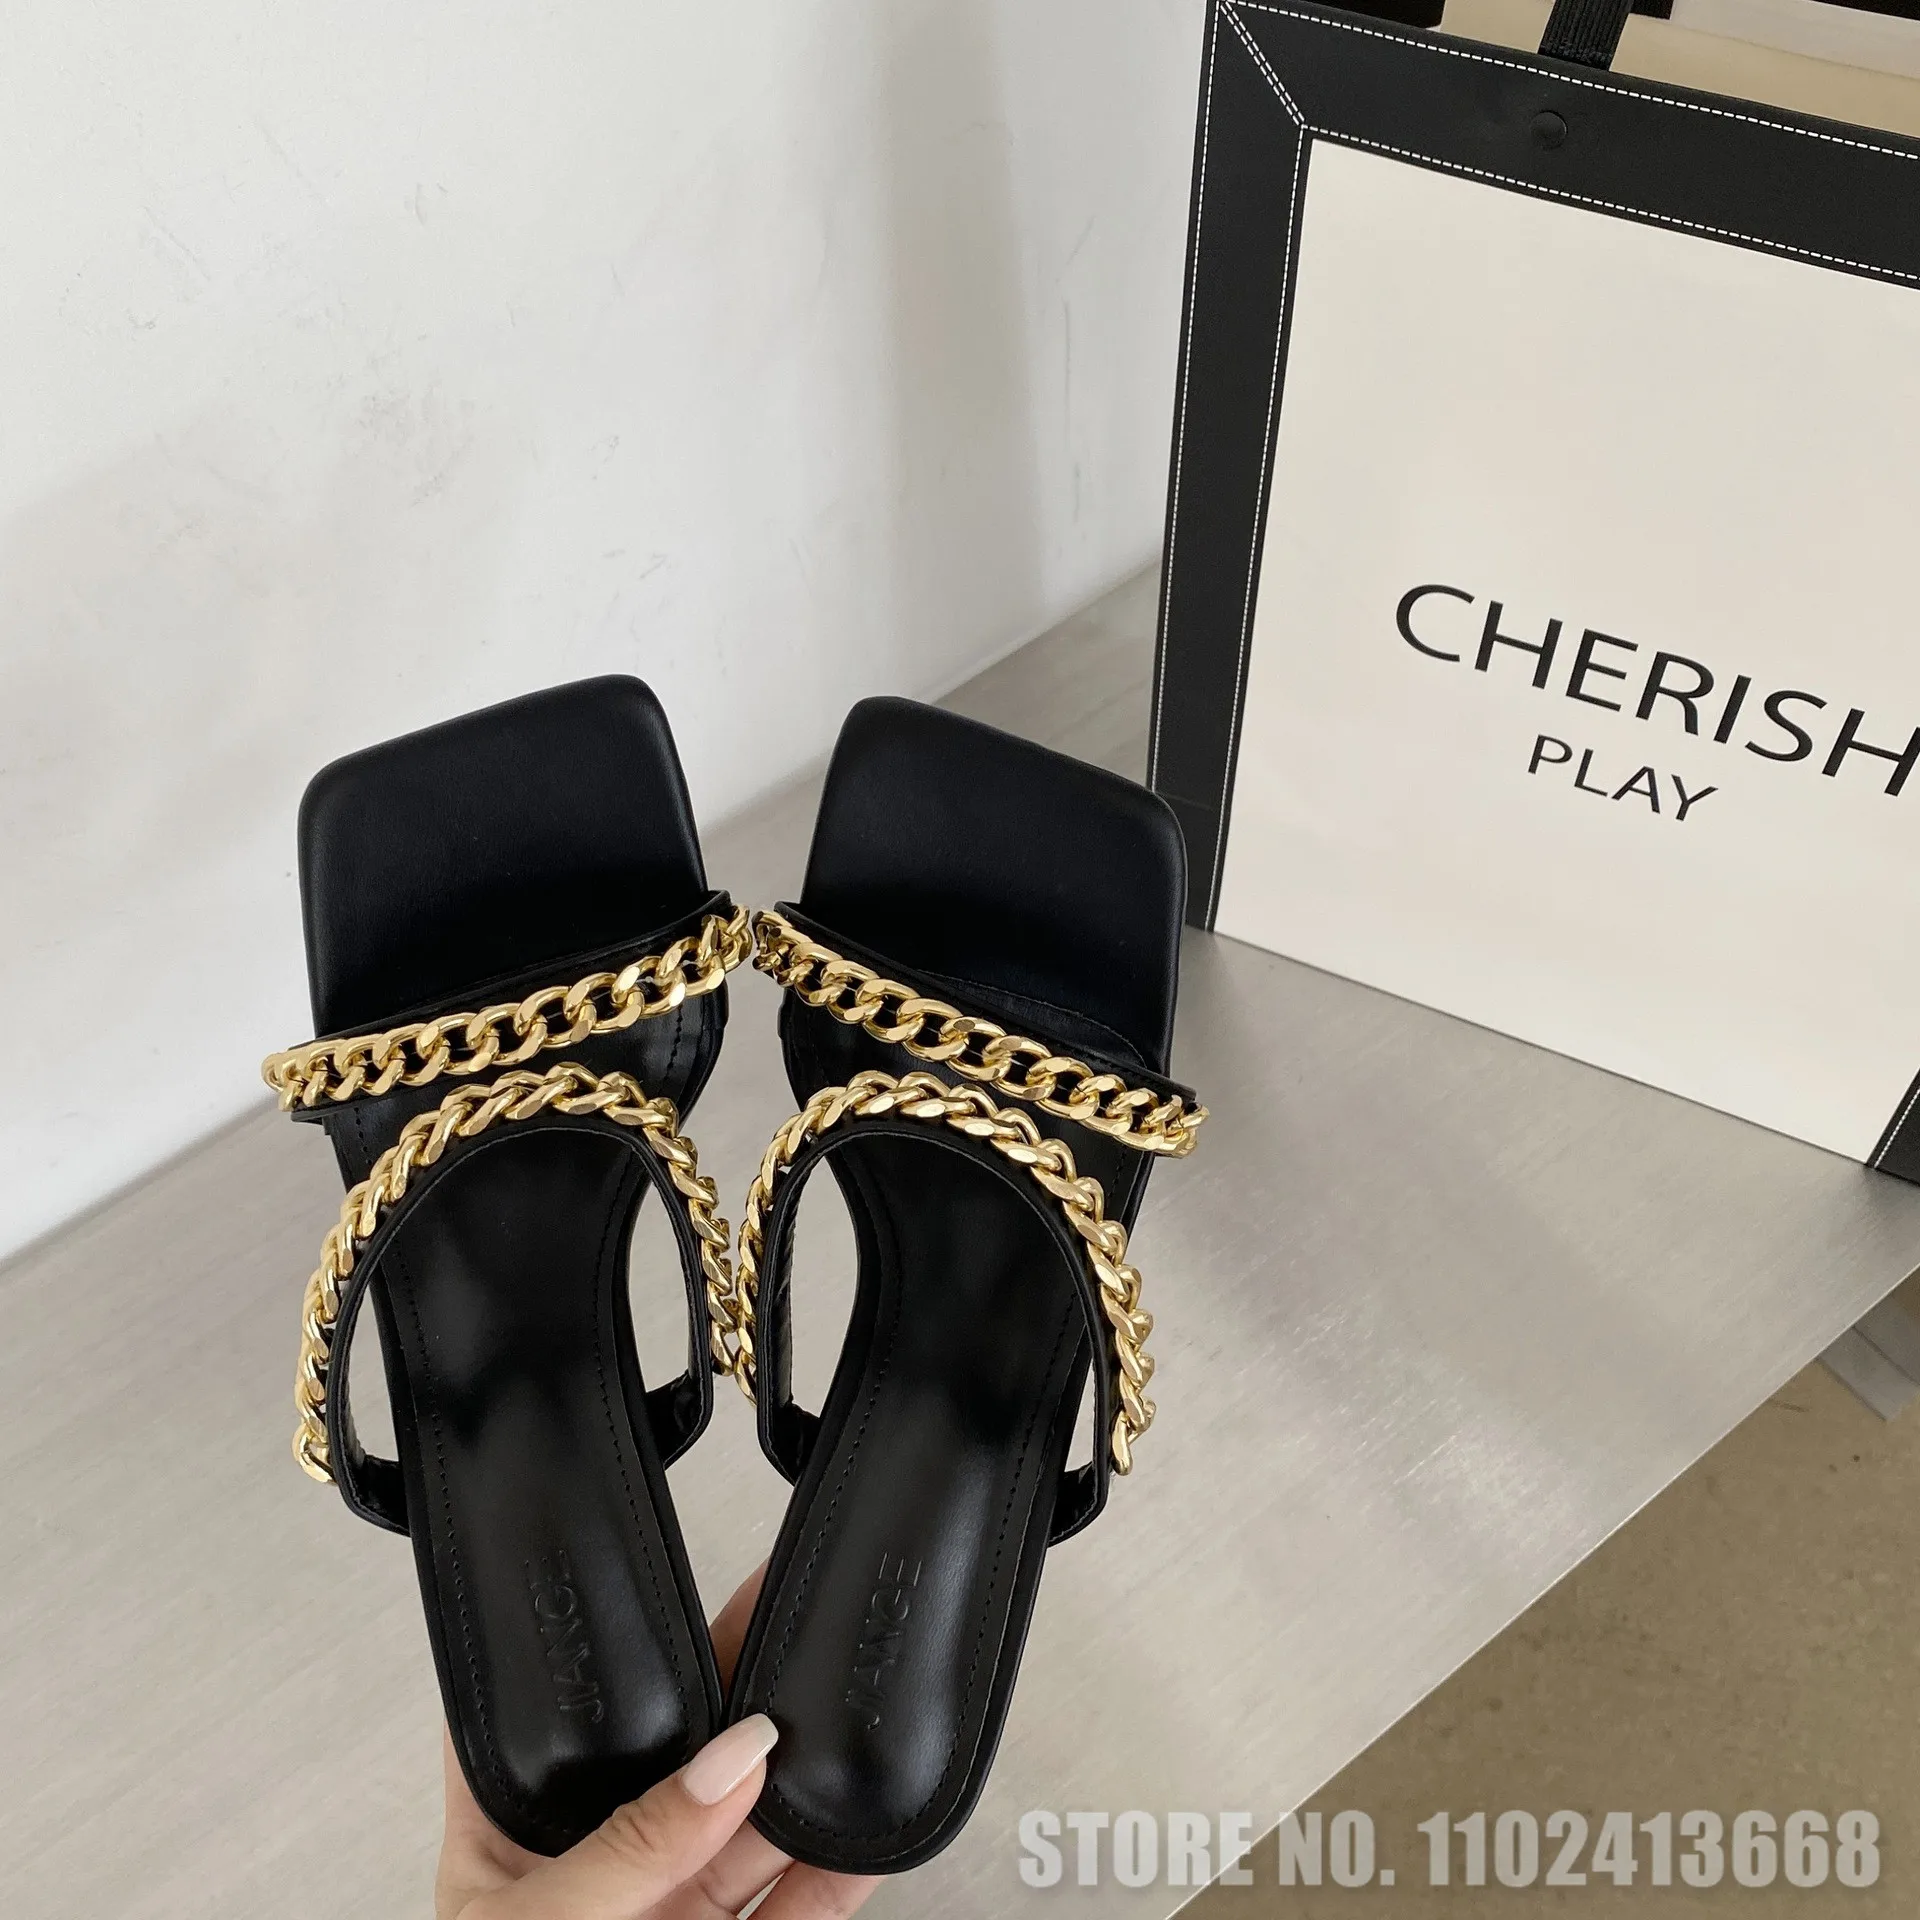 Black Minimalist Chain Narrow Band Slippers Square Toe Stiletto Shoes High Heel Party Fashion Soild Color Pumps Casual Slipper